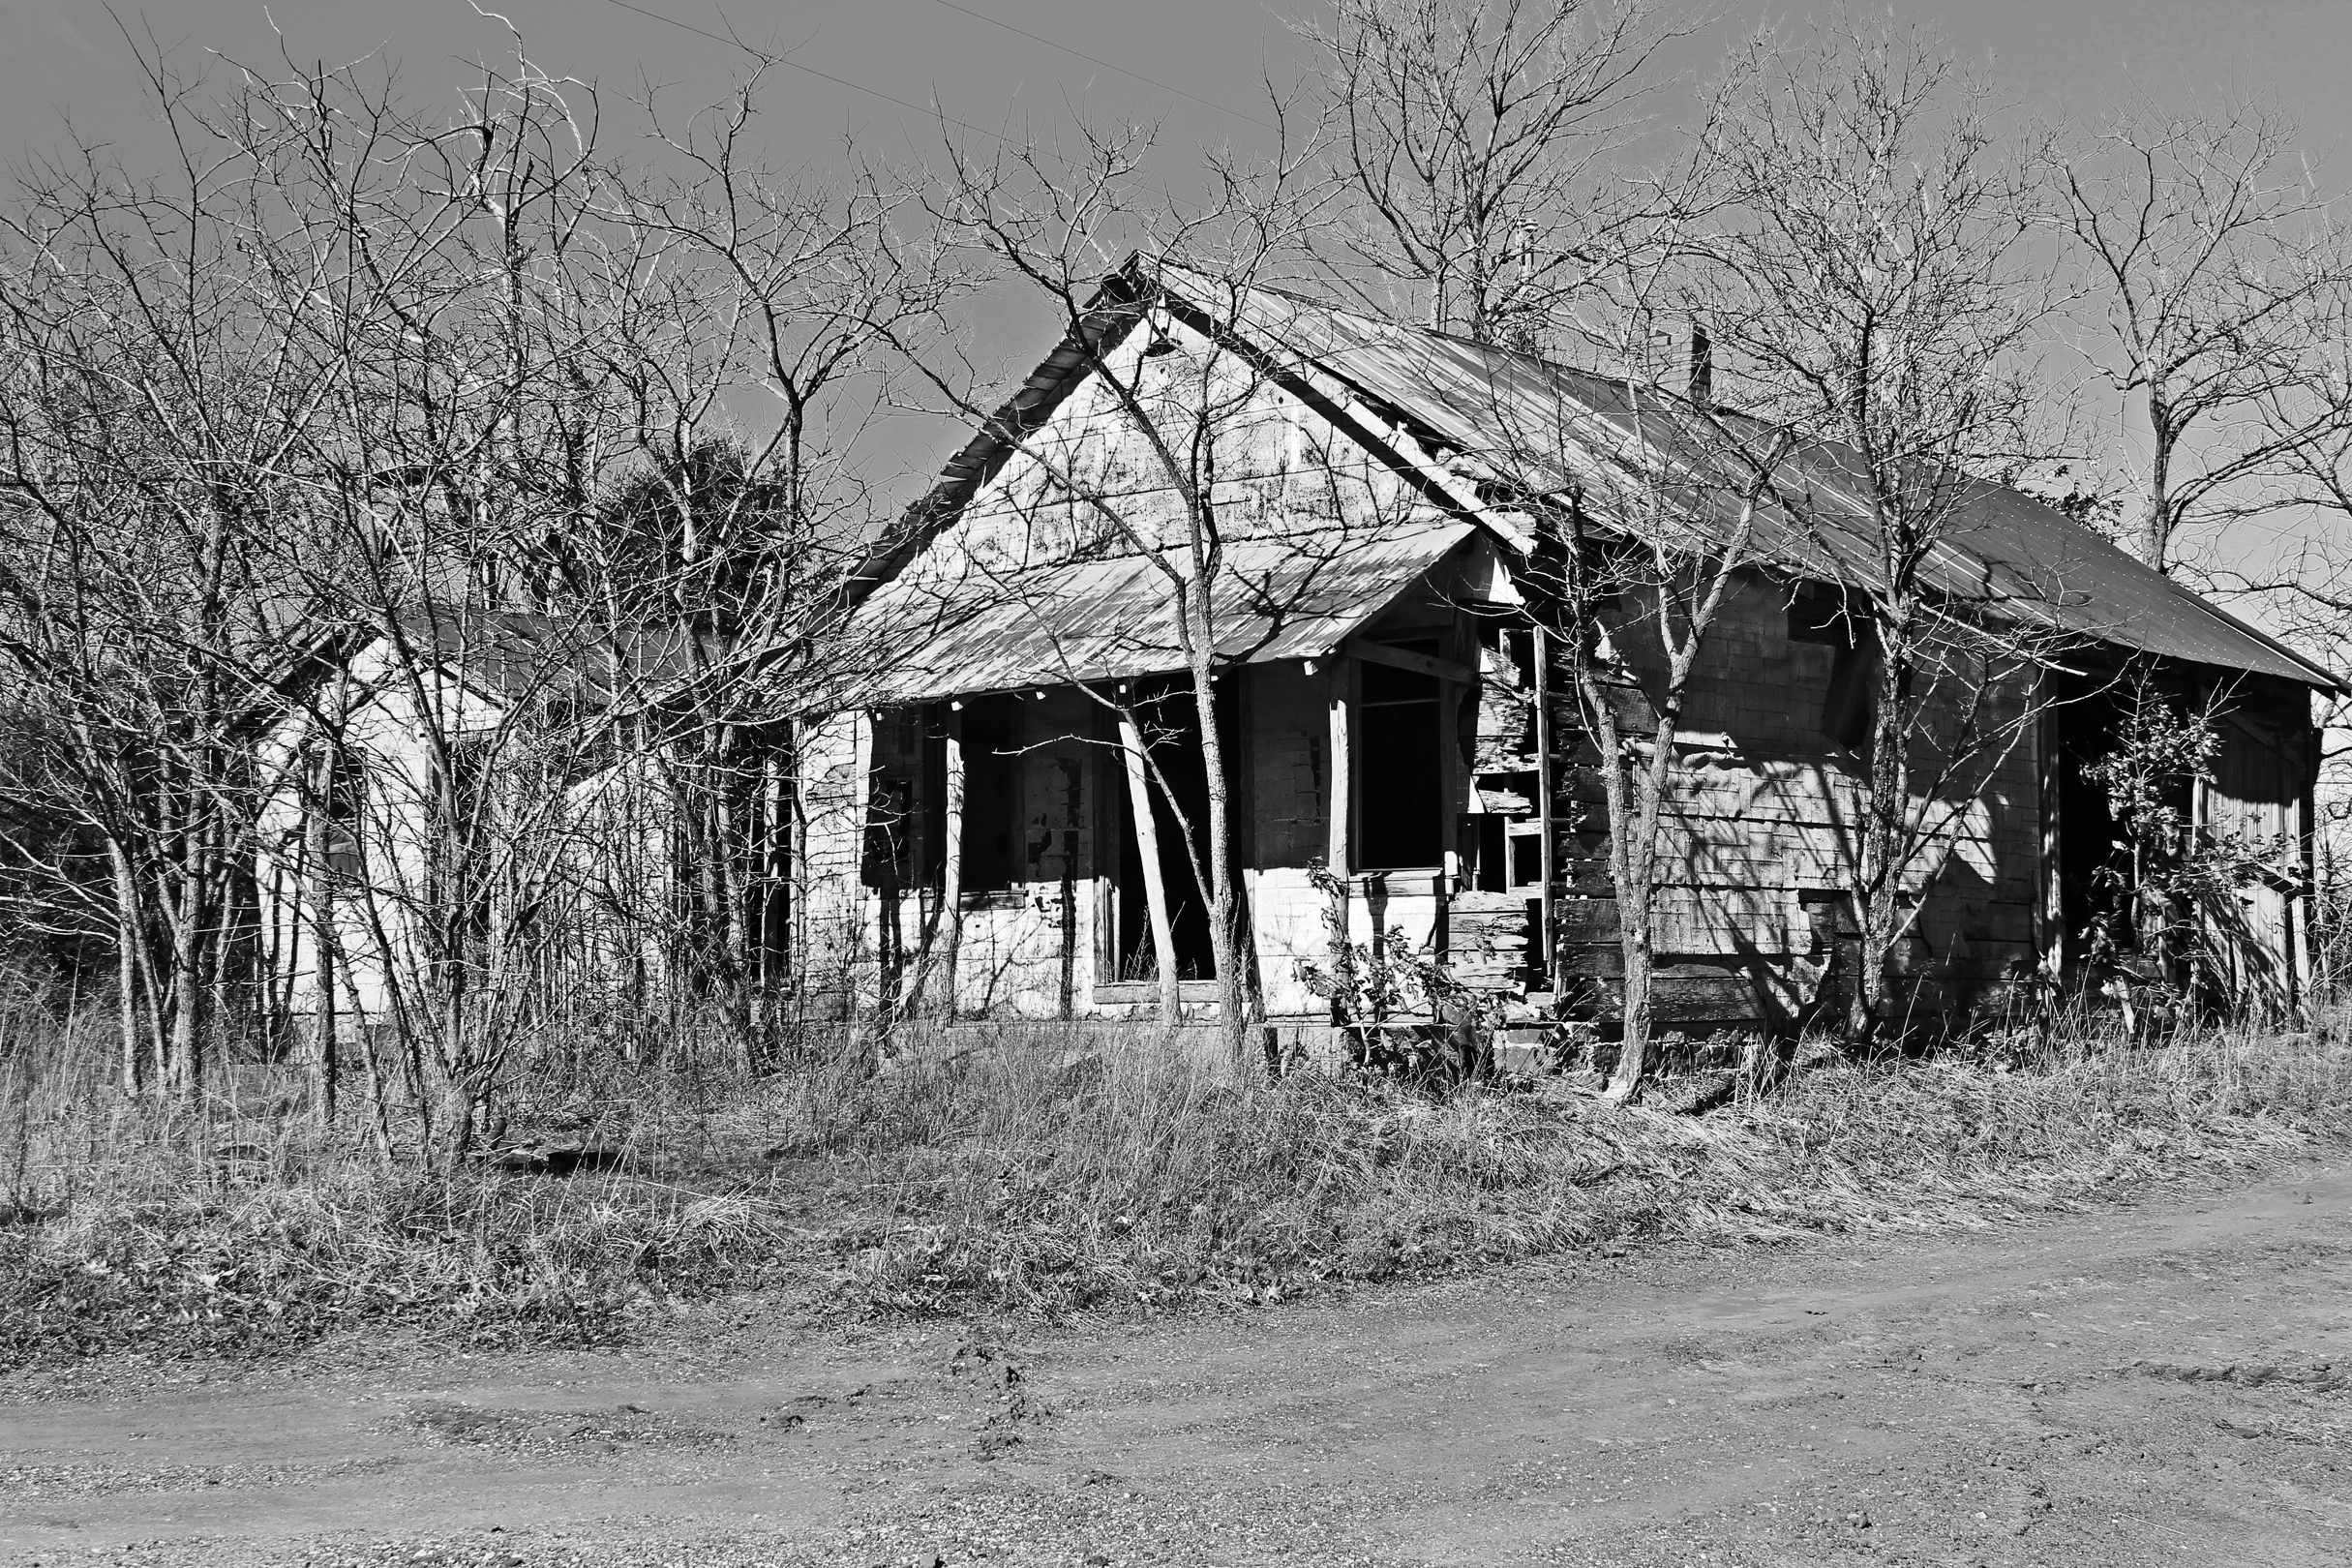    Art Hunter's General Store and Post Office  , 2014. Boston, Madison County, AR. B&amp;W HDR digital image. 